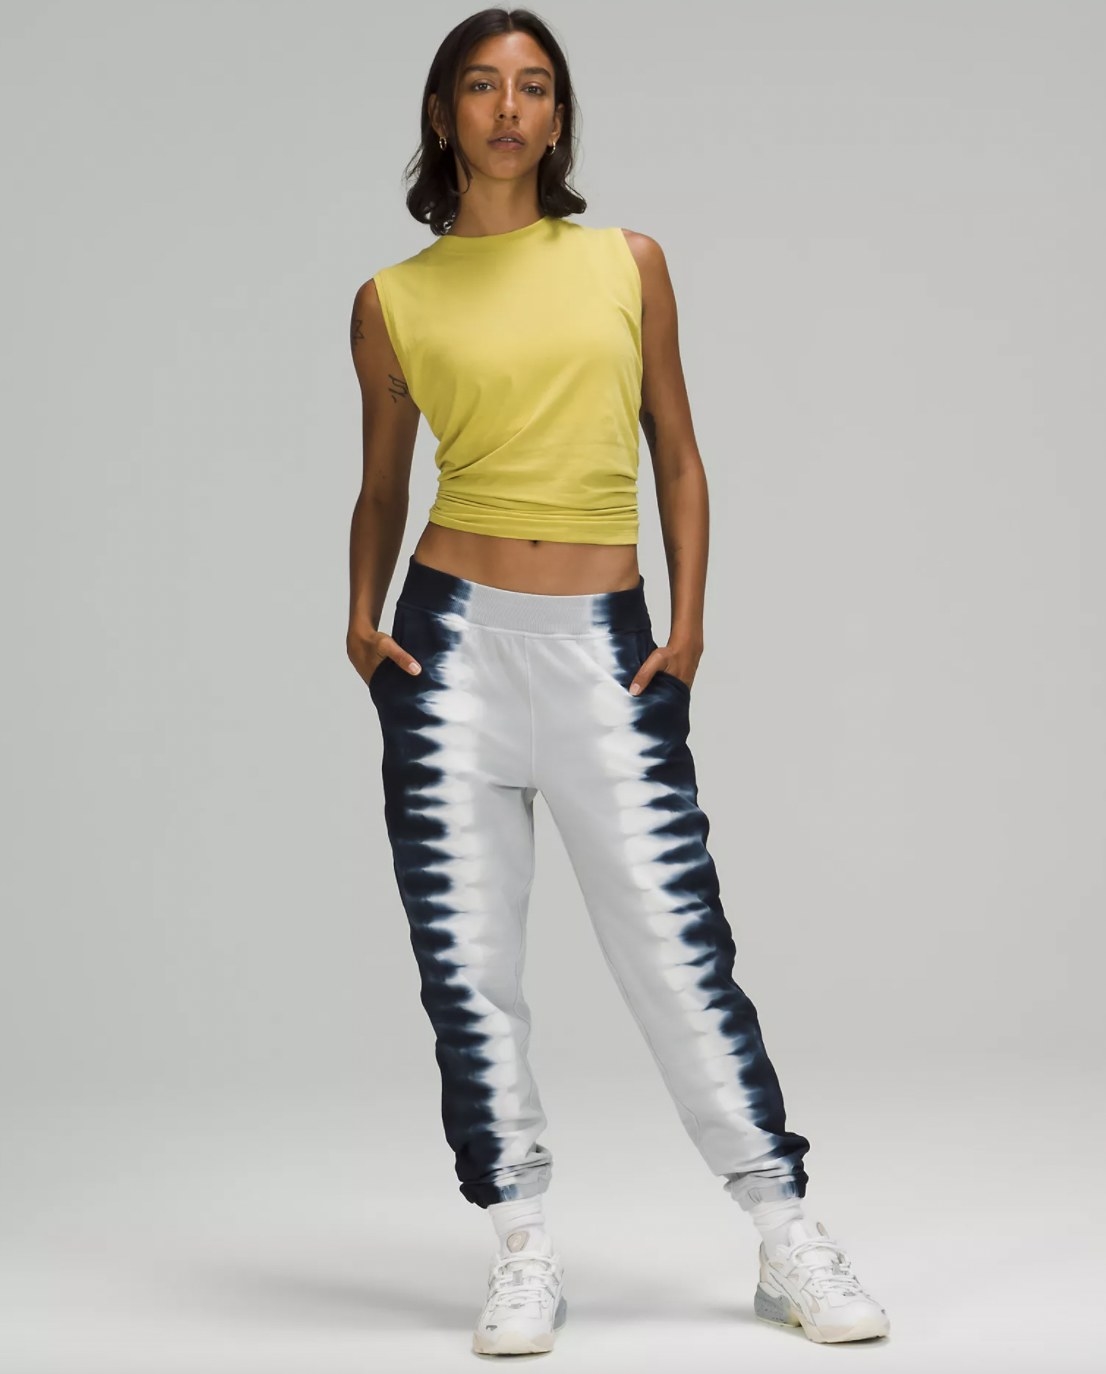 A woman wearing a yellow tank top and white and blue tie-dyed joggers